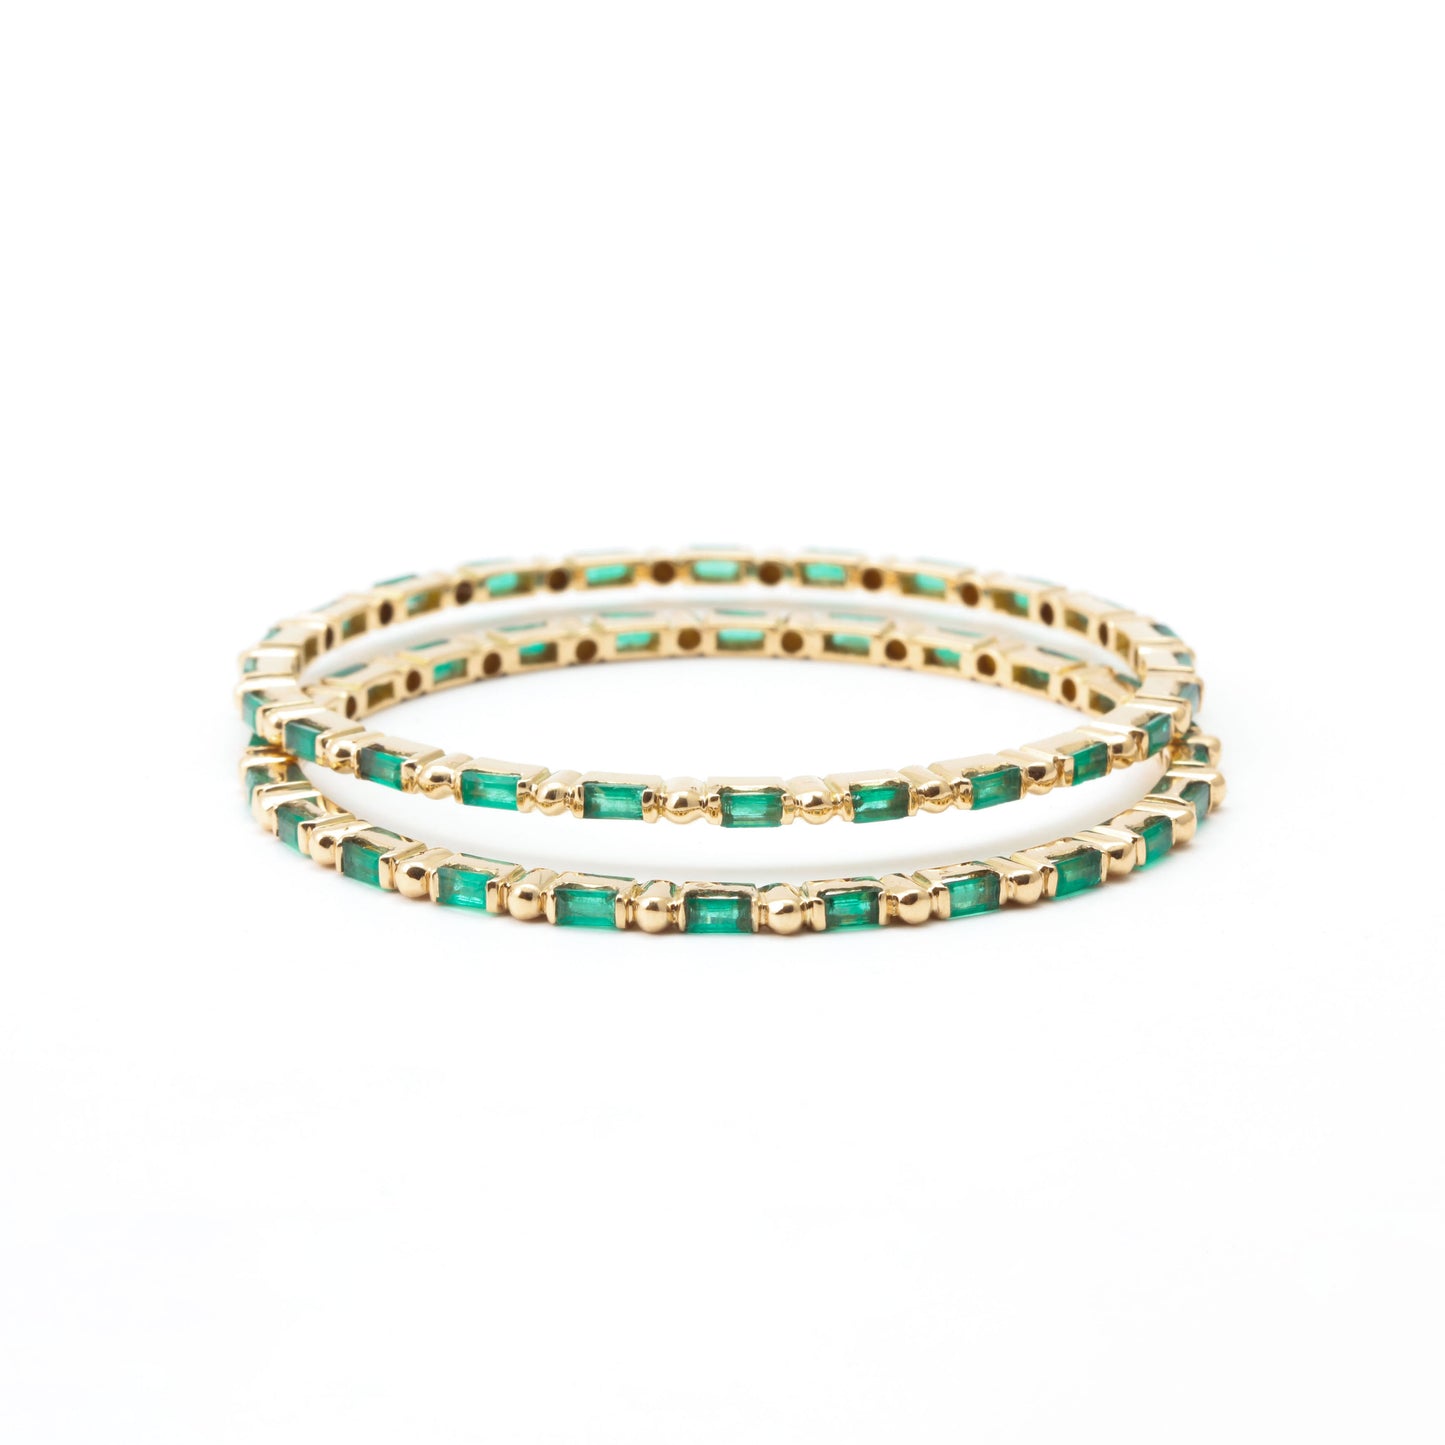 The Abi Gold and Emerald Bangle by Rasvihar